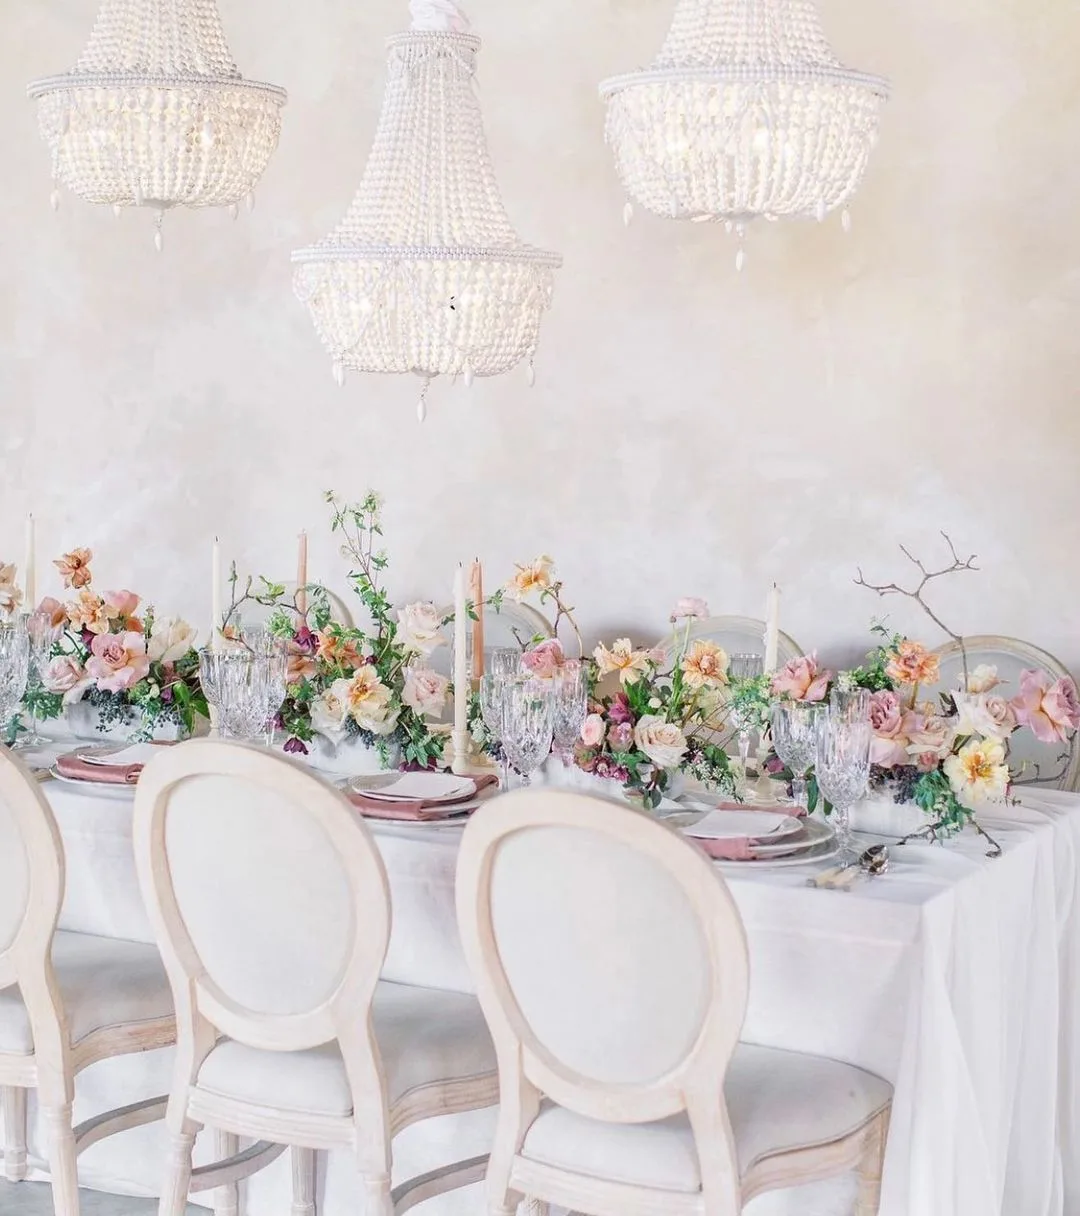 Chandeliers And Whimsical Decor